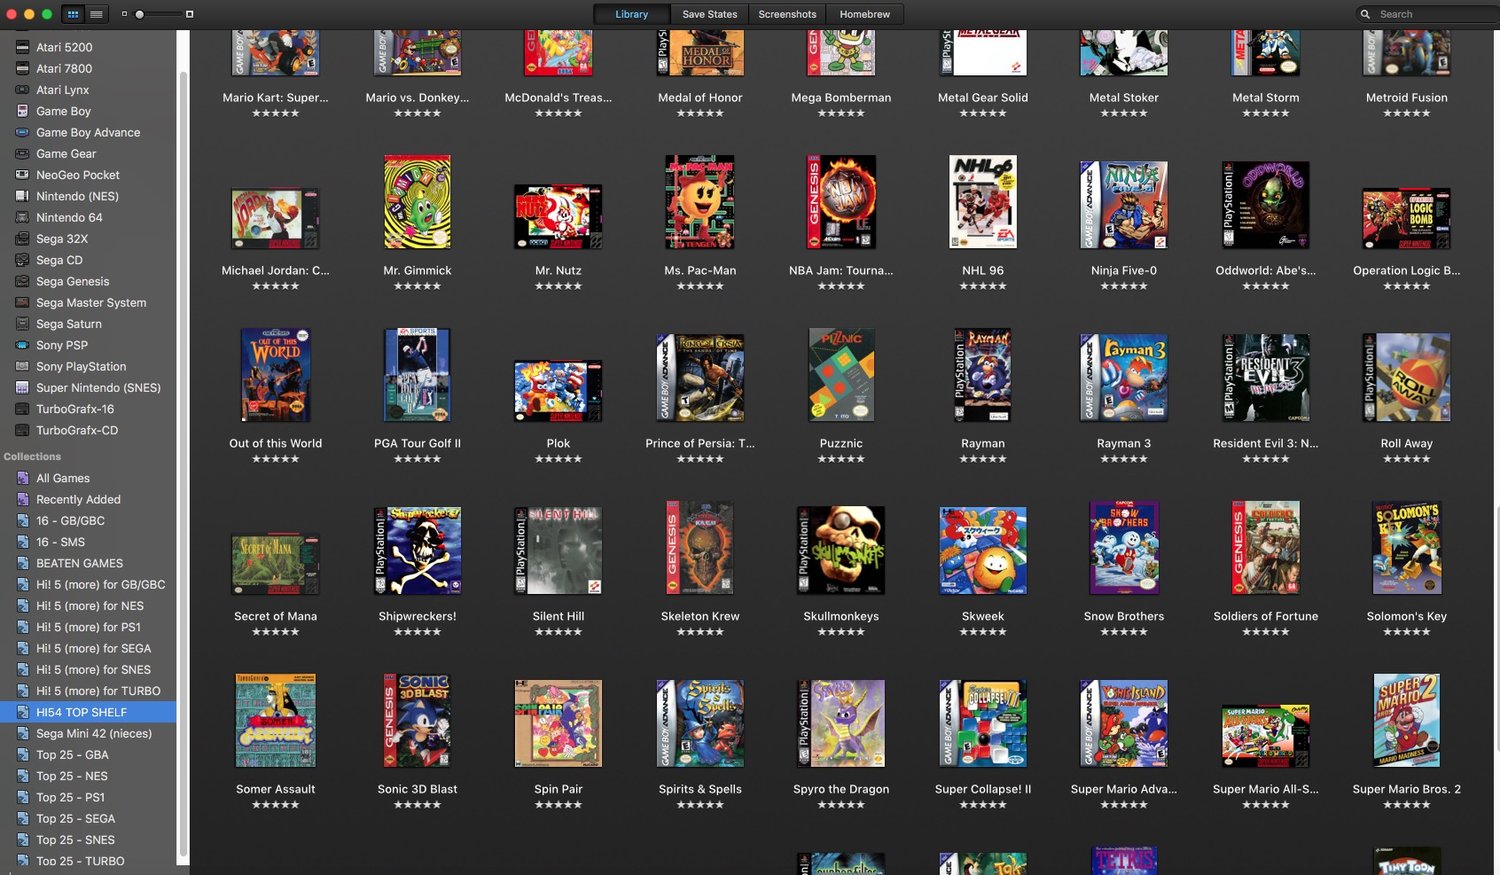 How to Play SNES, Gameboy, Nintendo 64, and More Retro Games on